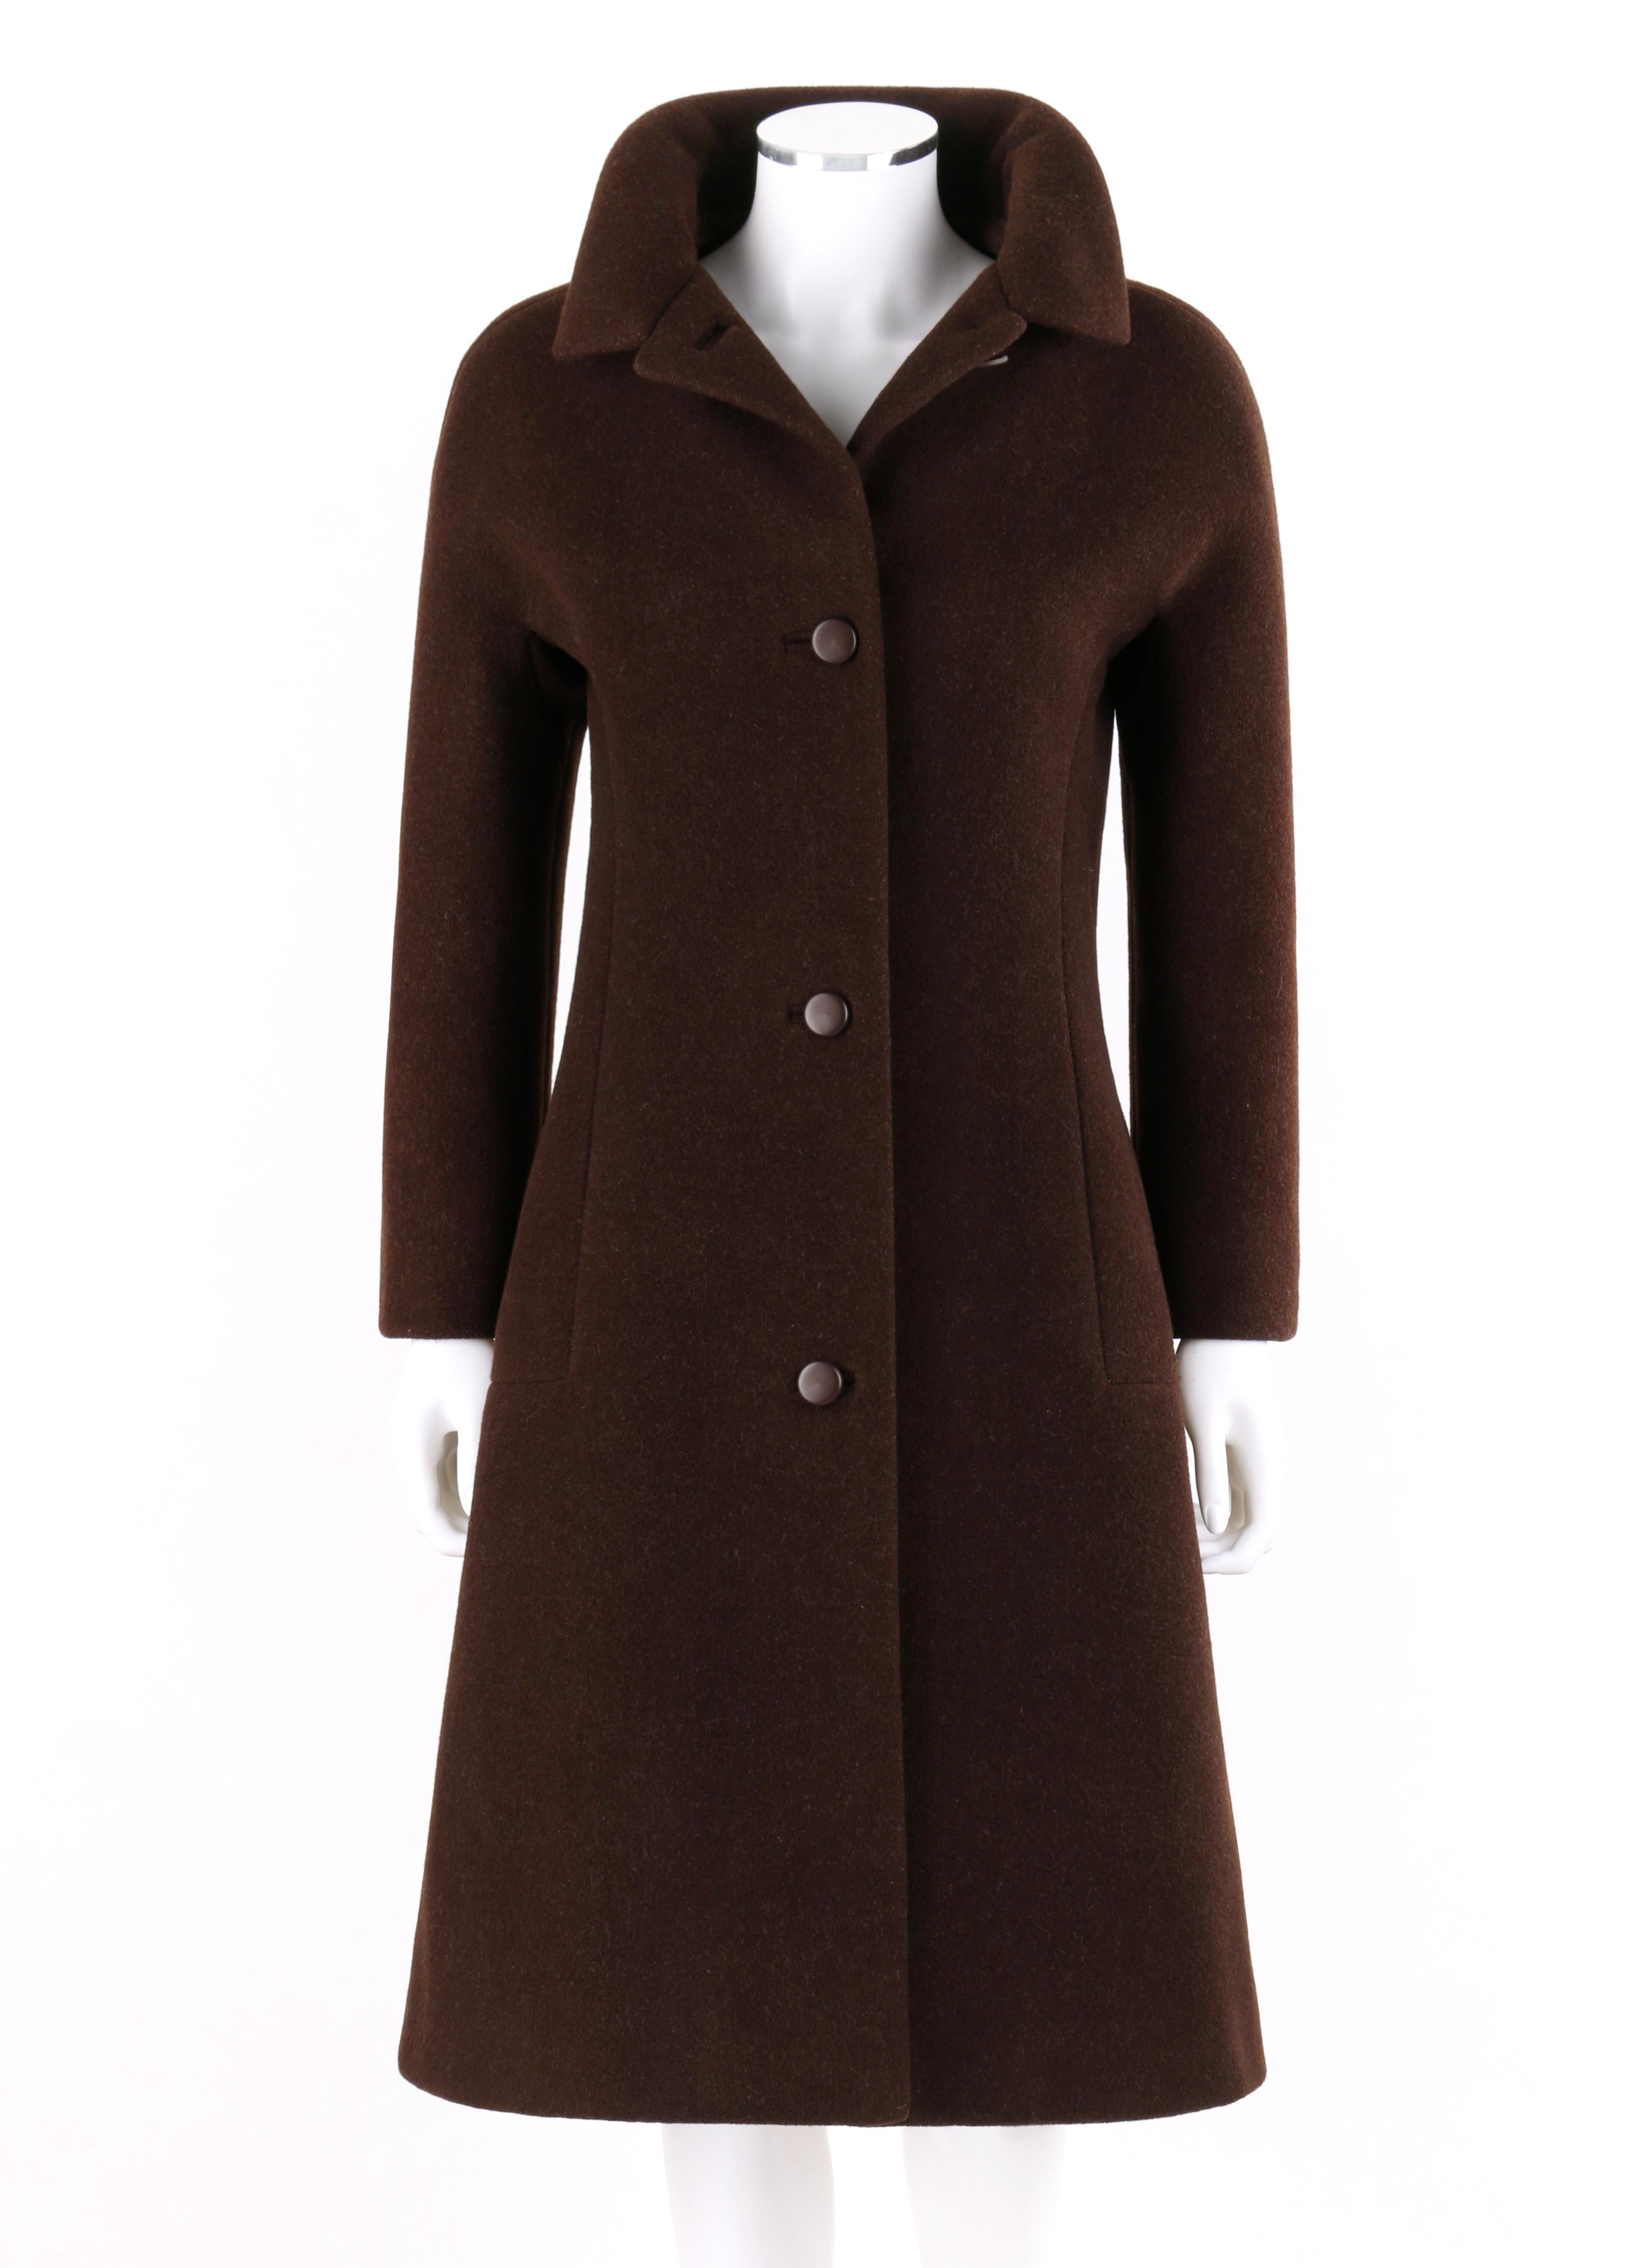 GIVENCHY c. 1960’s Early Haute Couture Dark Brown Wool Princess Coat Jacket 

Circa: 1960’s 
Label(s): Givenchy 
Style: Princess Coat
Color(s): Brown
Lined: Yes 
Unmarked Fabric Content (feel of): Exterior: Wool blend. Lining: Silk
Additional